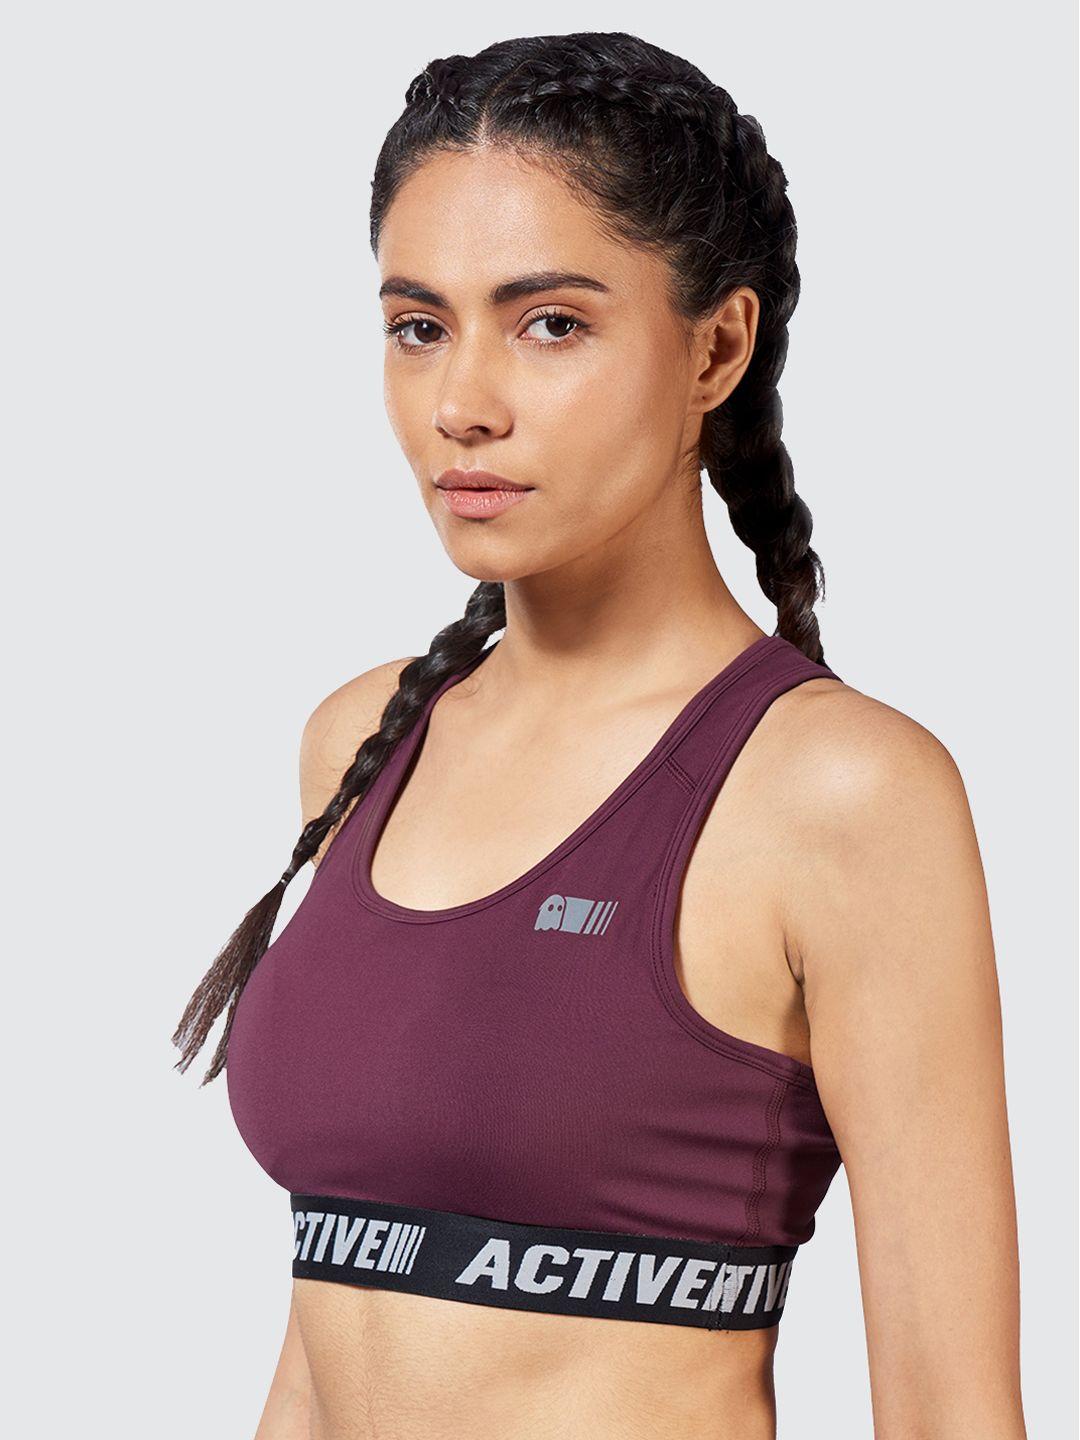 the souled store burgundy training & gym workout bra